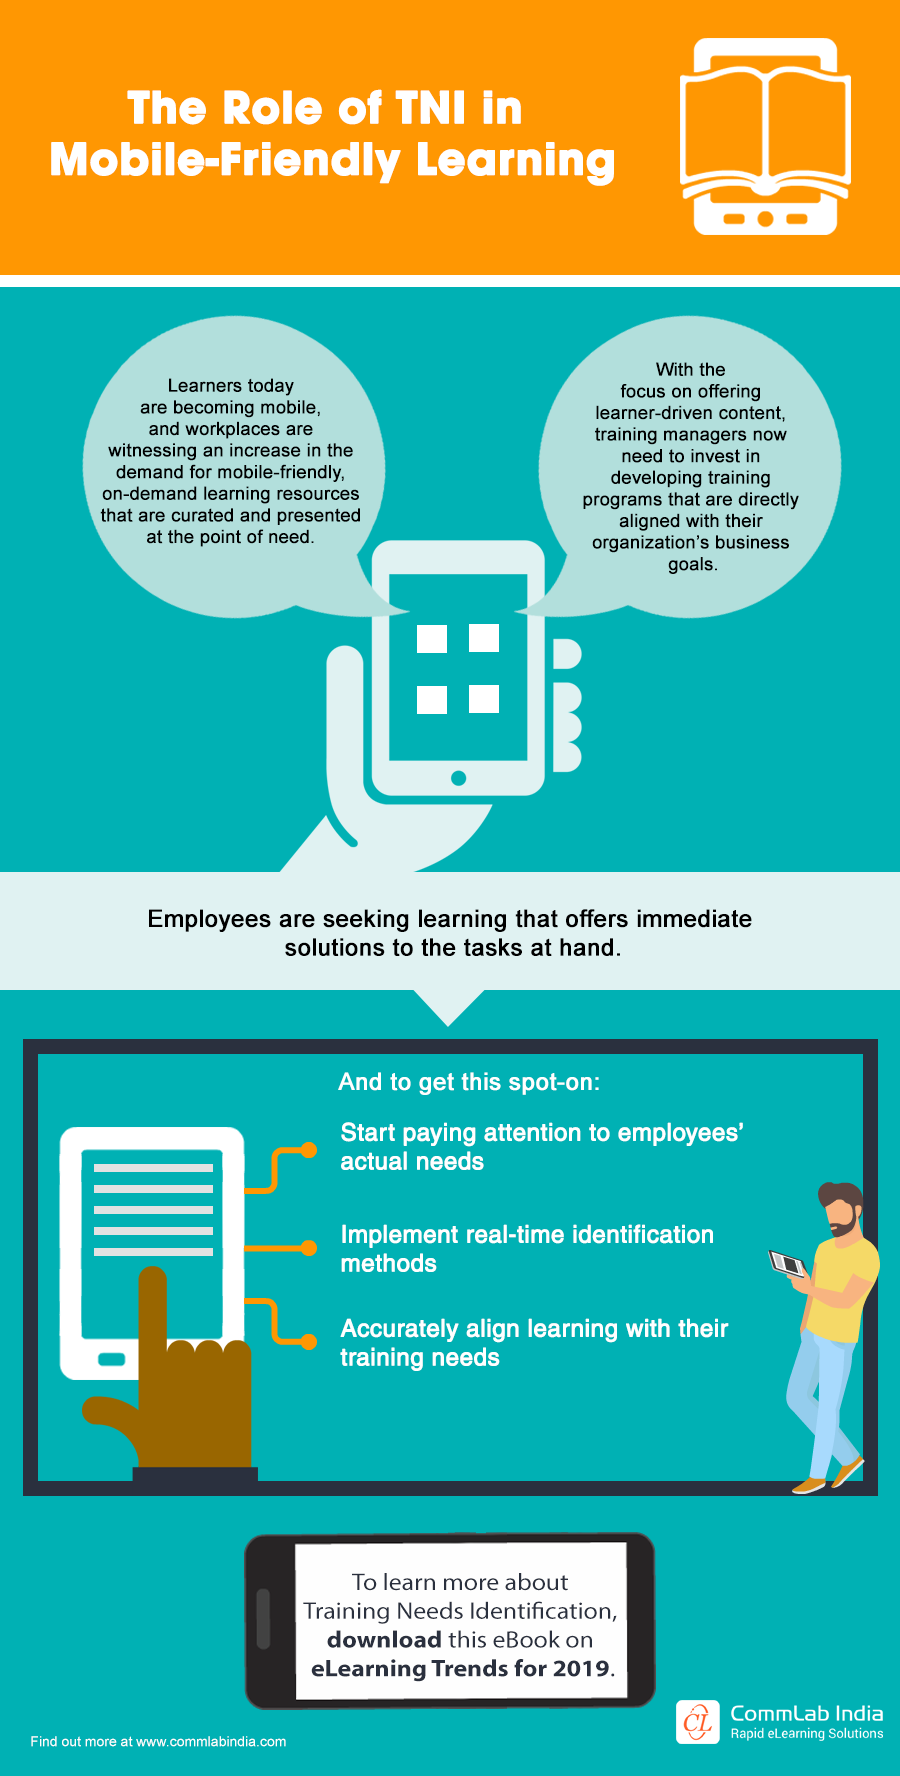 The Role of TNI in Mobile-Friendly Learning [Infographic]